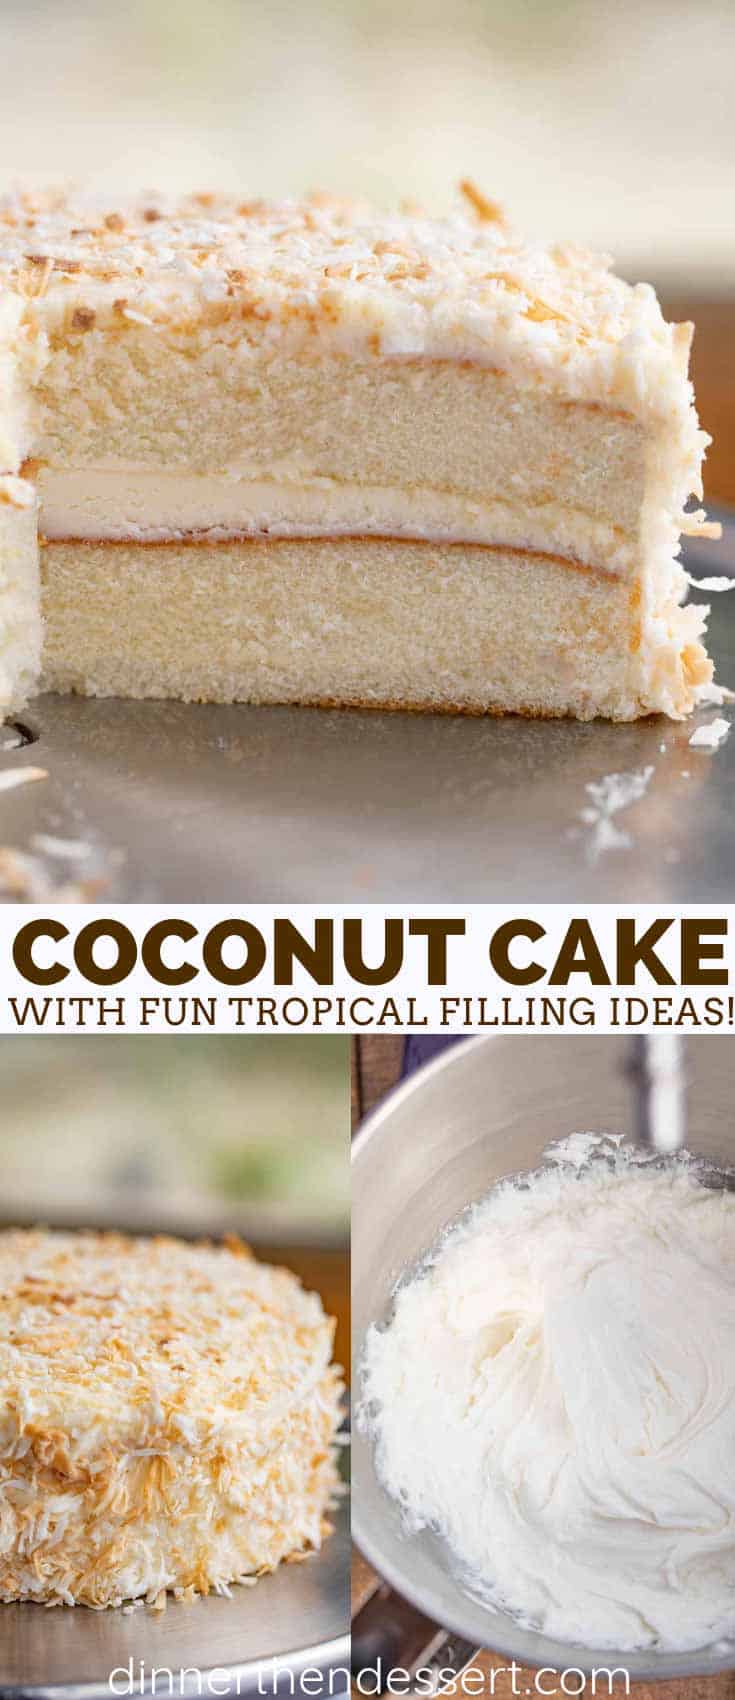 THE BEST Coconut Cake